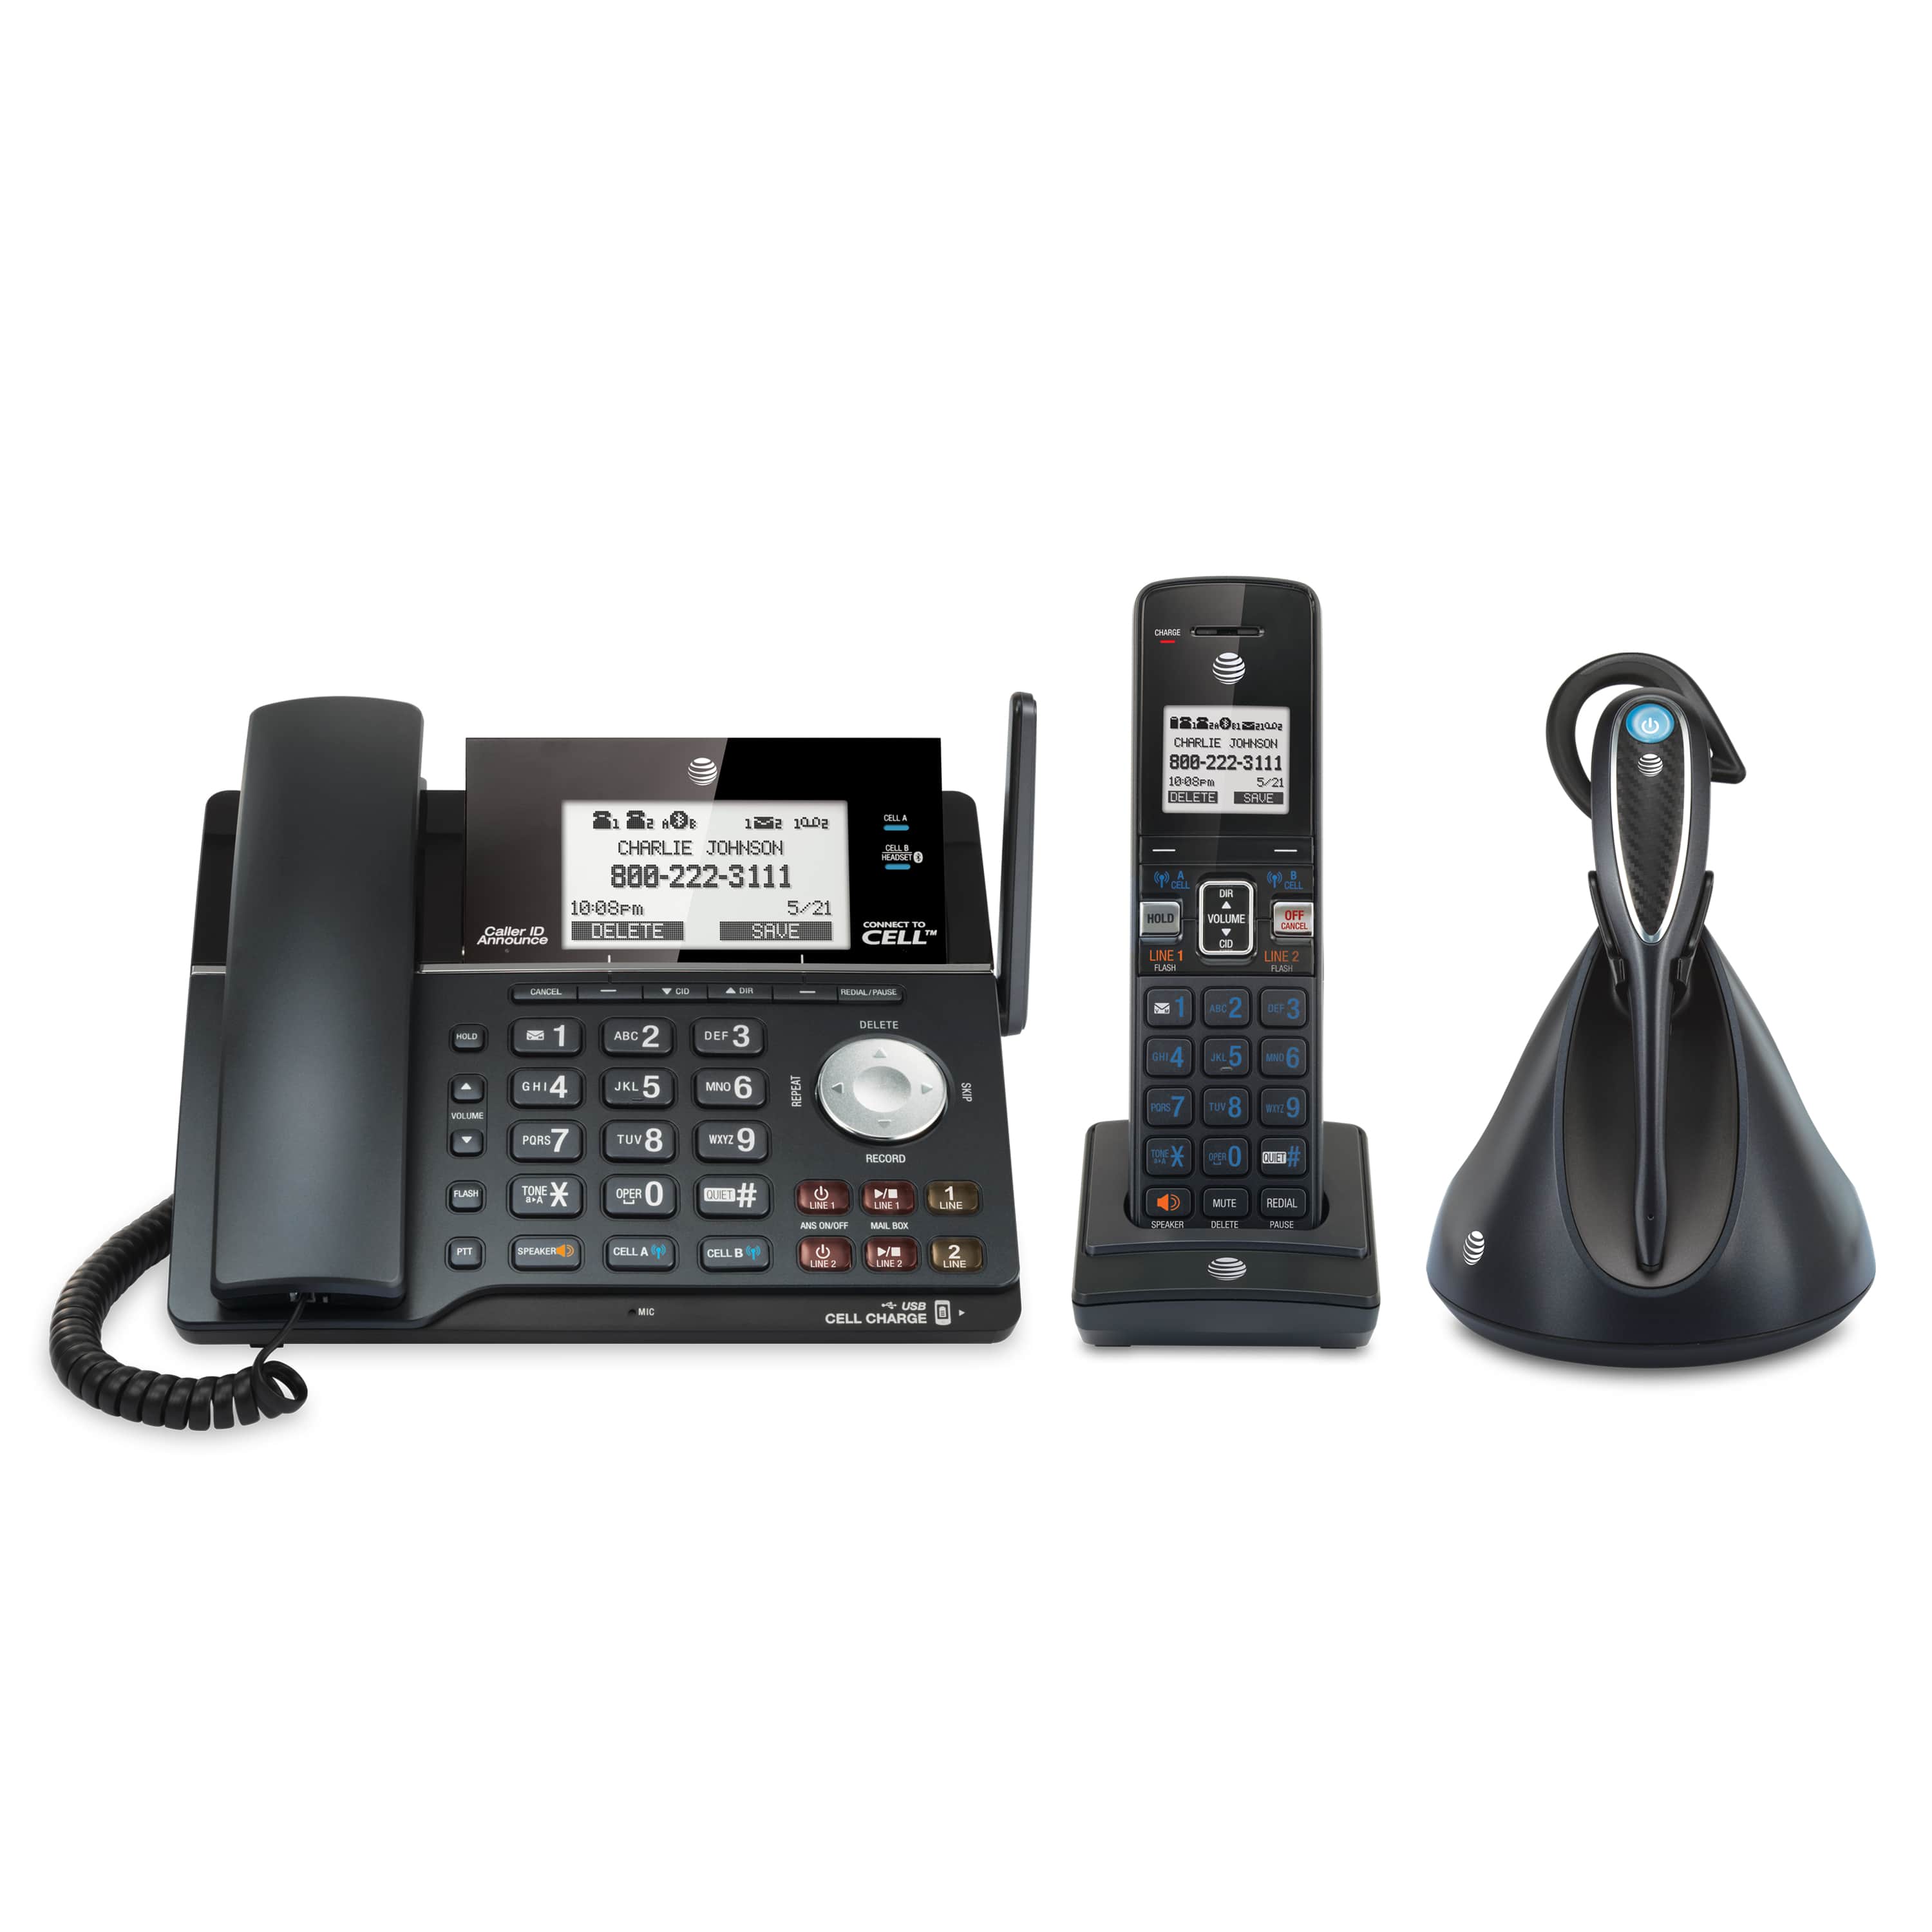 2-line Connect to Cell™ corded/cordless phone system with answering system & cordless headset - view 1